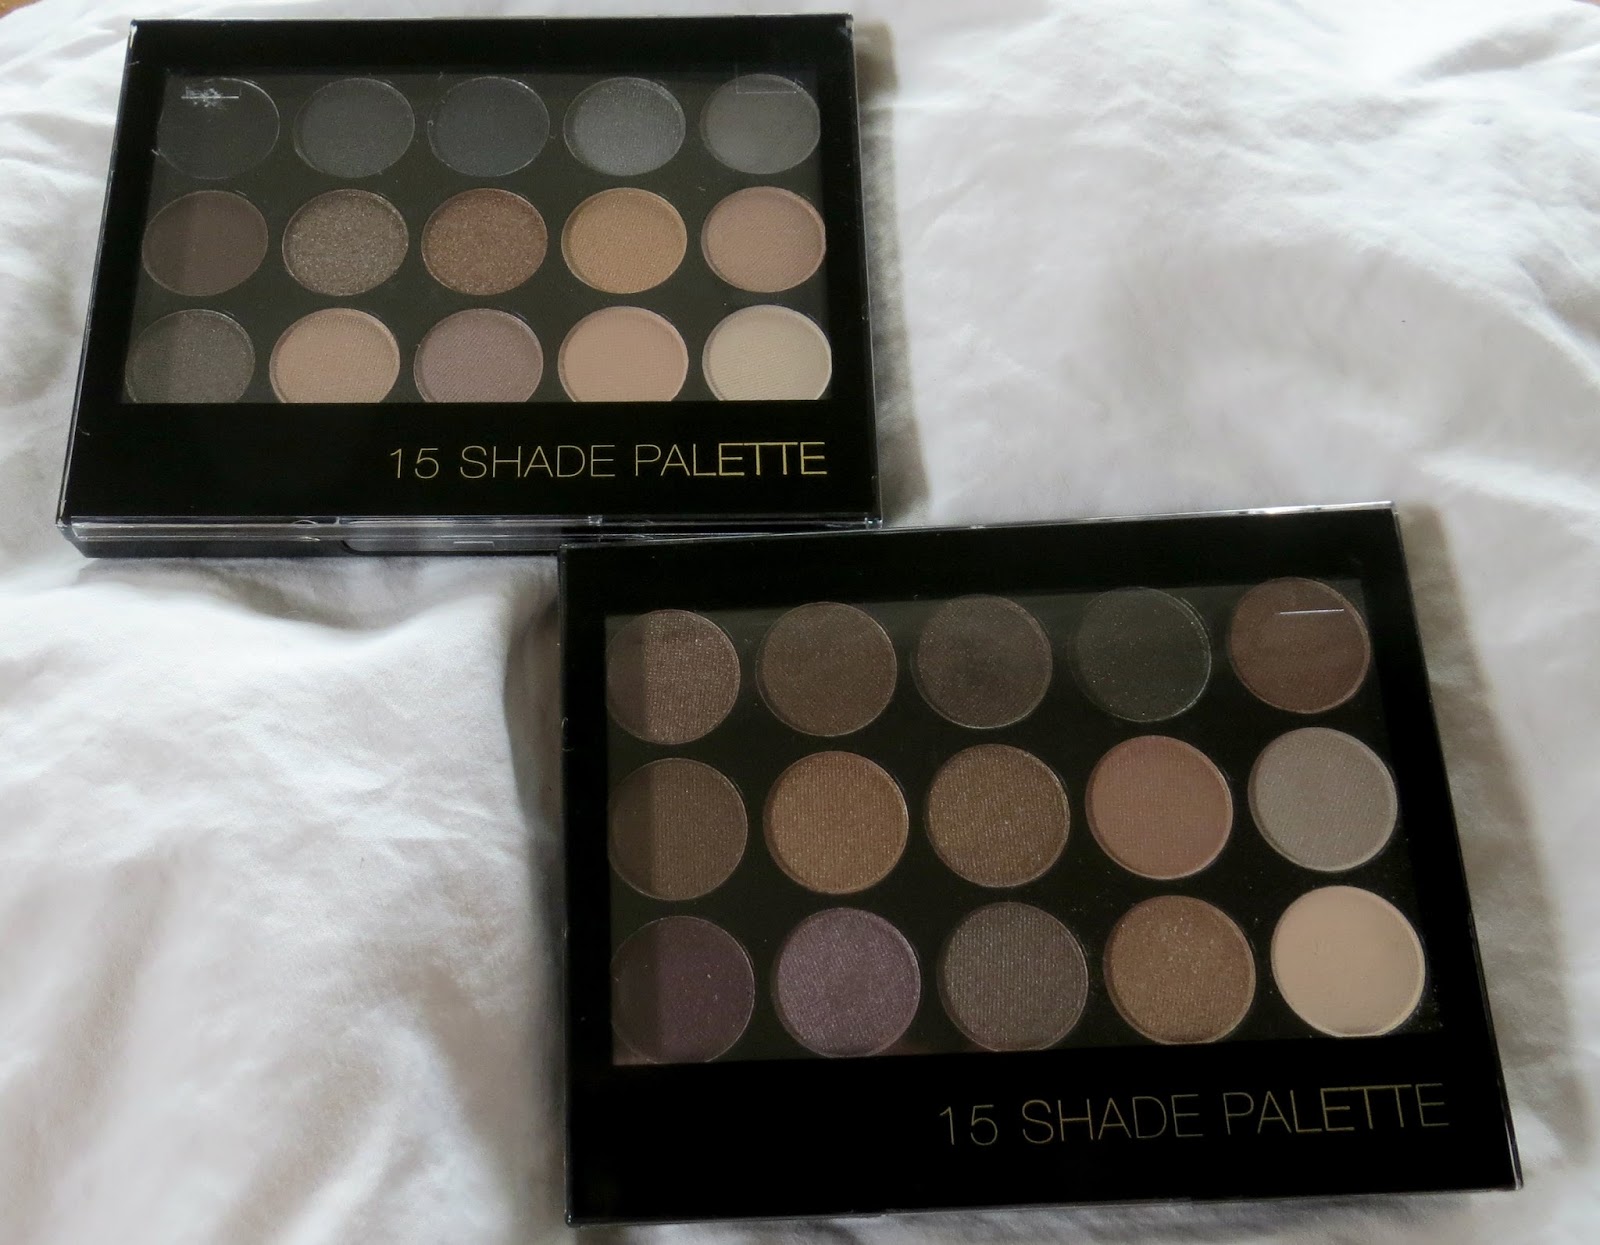 F21 15 Shade Palette in BrownTaupe